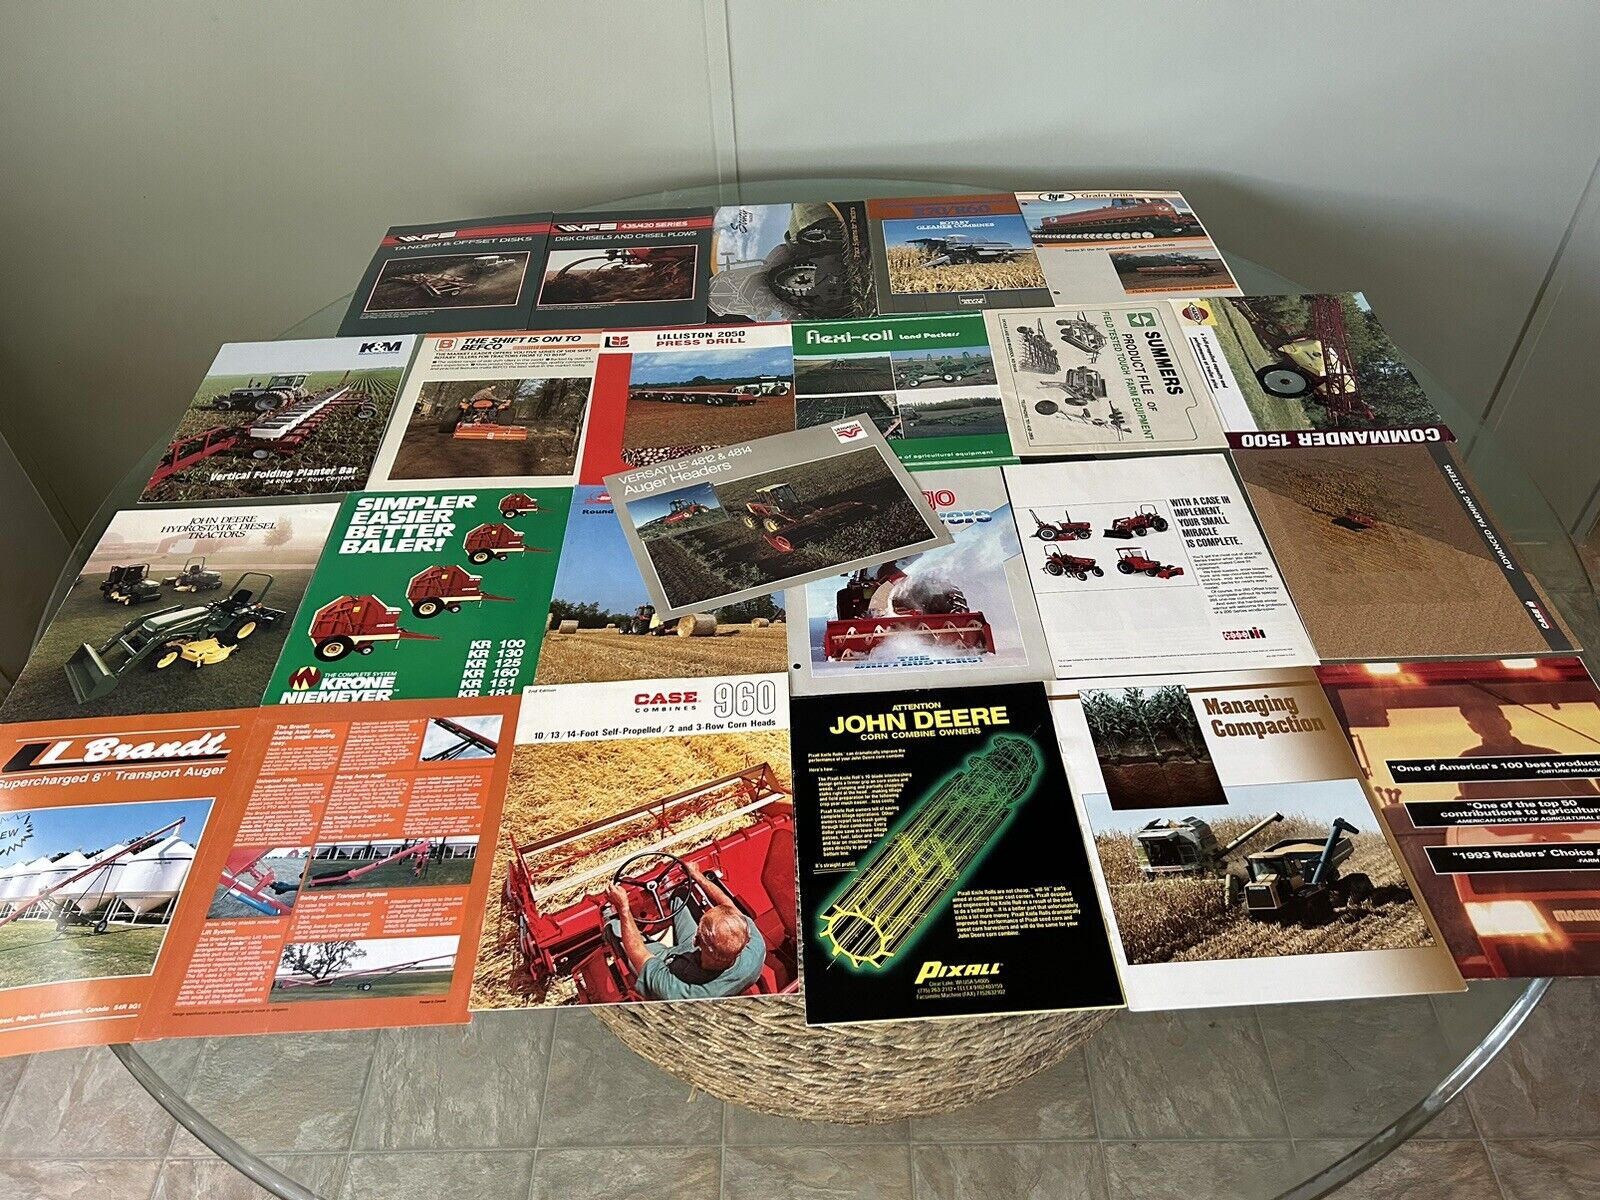 Large Mixed Lot of 24 Farm, Tractor, Implement, and Agricultural Brochures